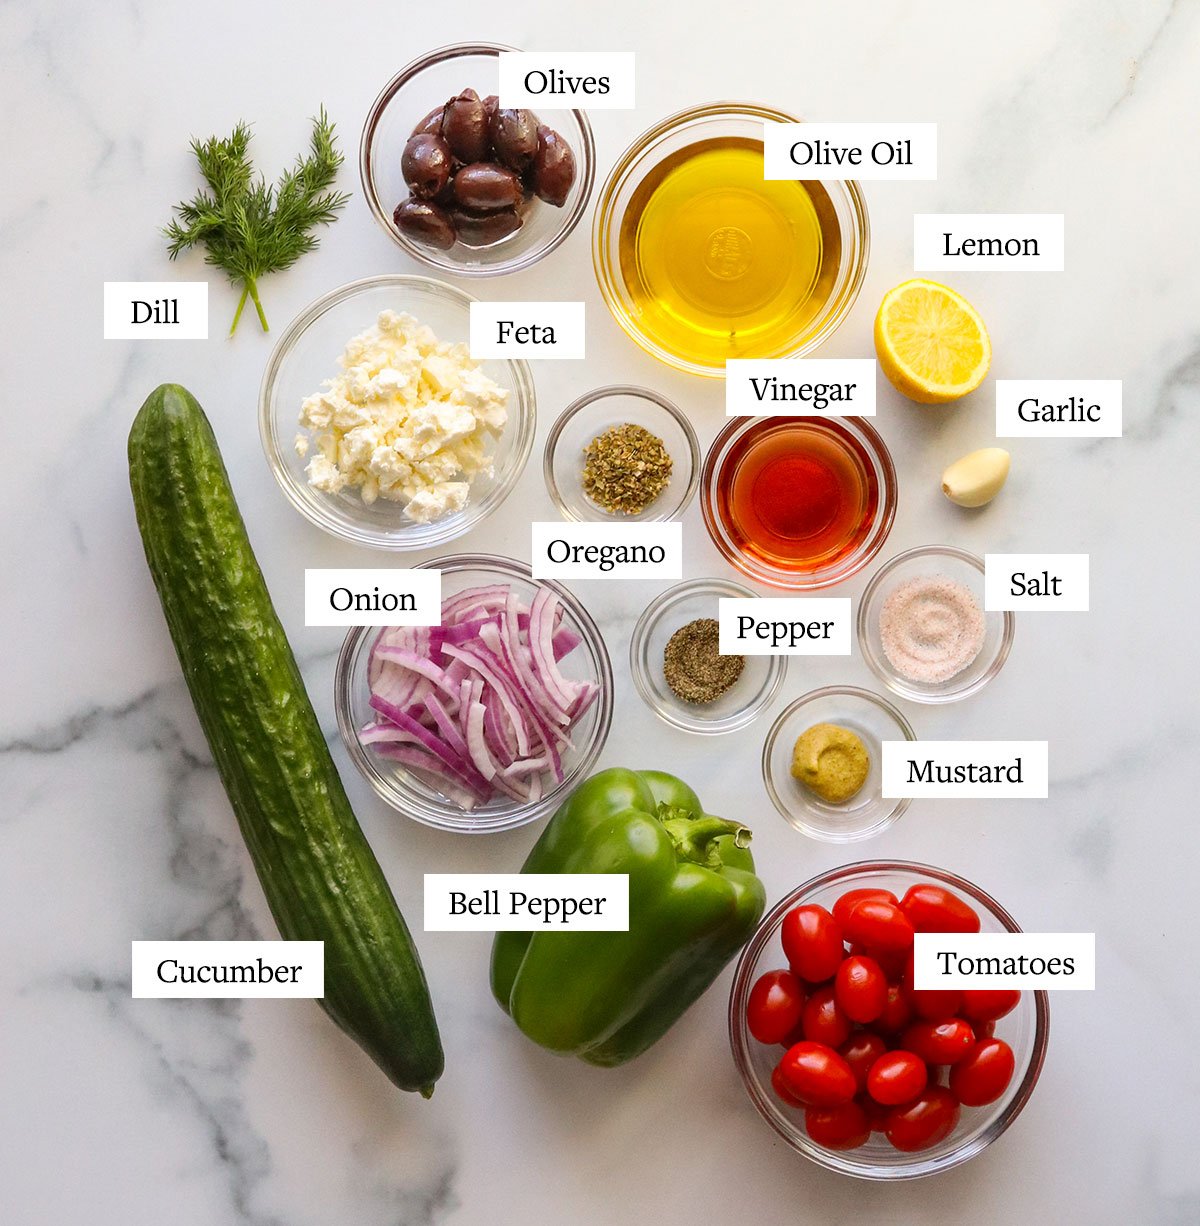 Greek salad ingredients labeled on a marble surface.